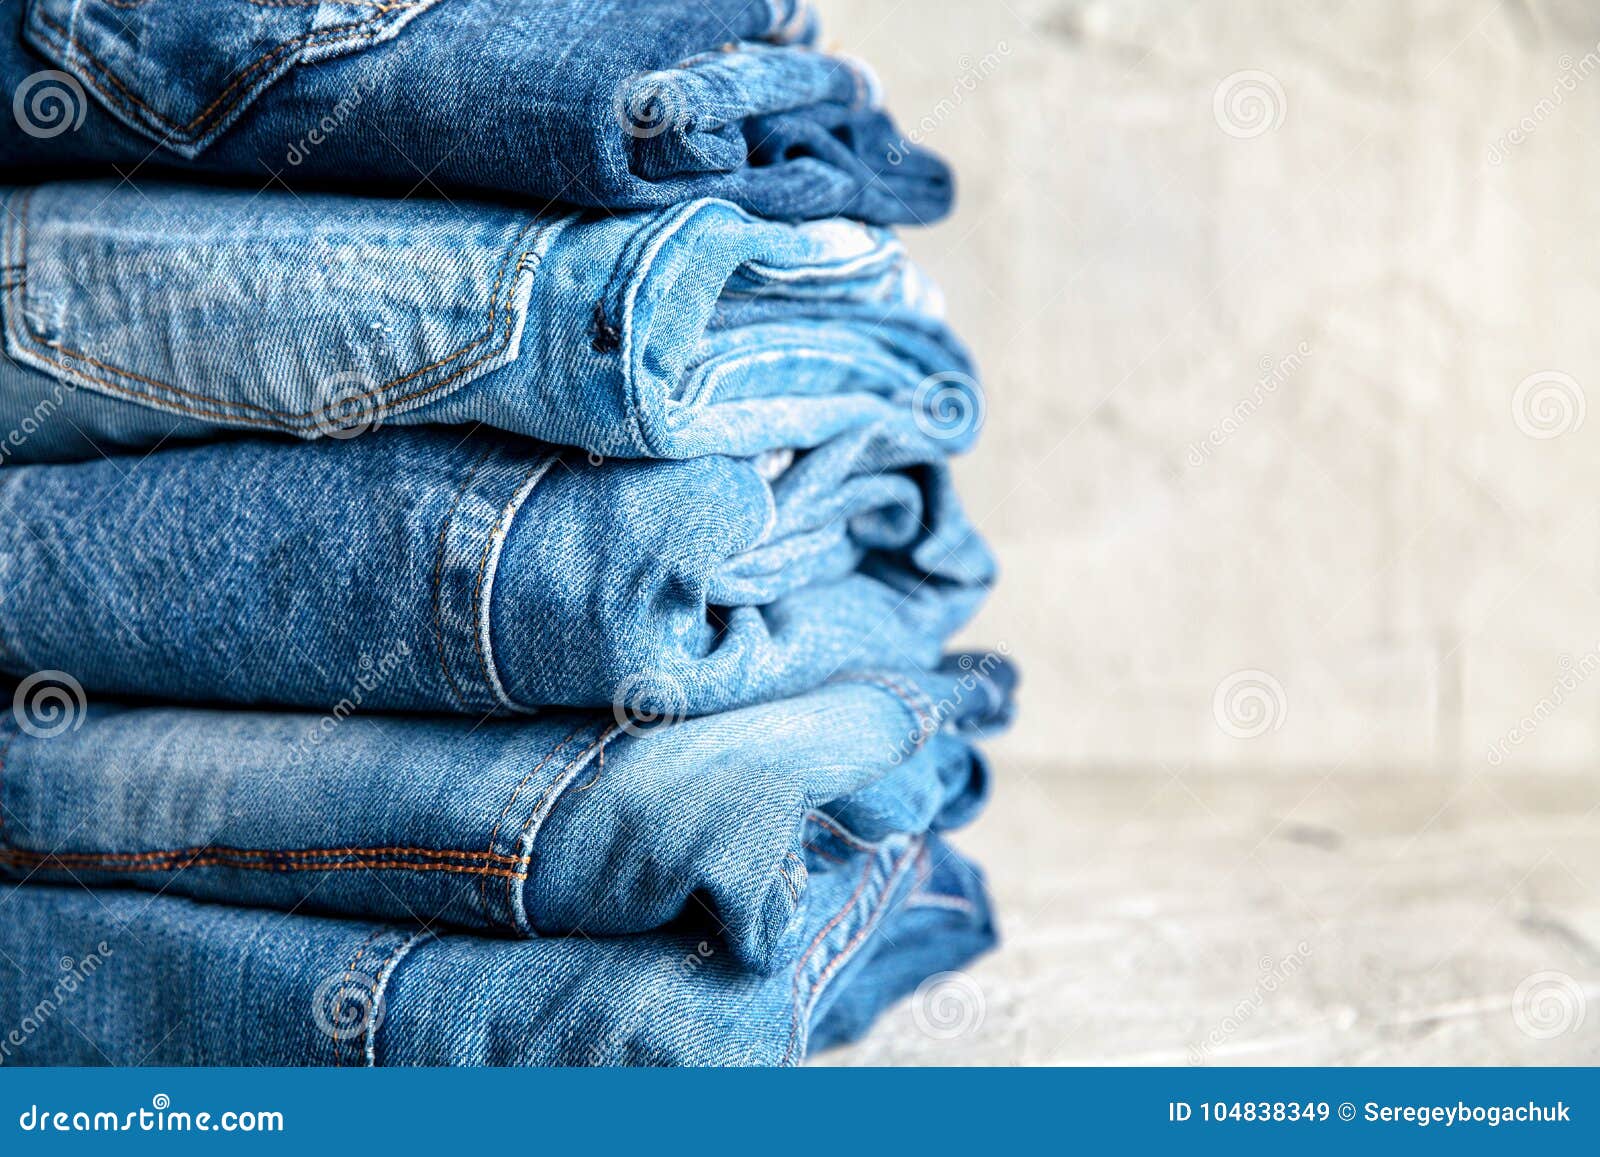 Stack of Blue Jeans on a Gray Background Stock Image - Image of blue ...